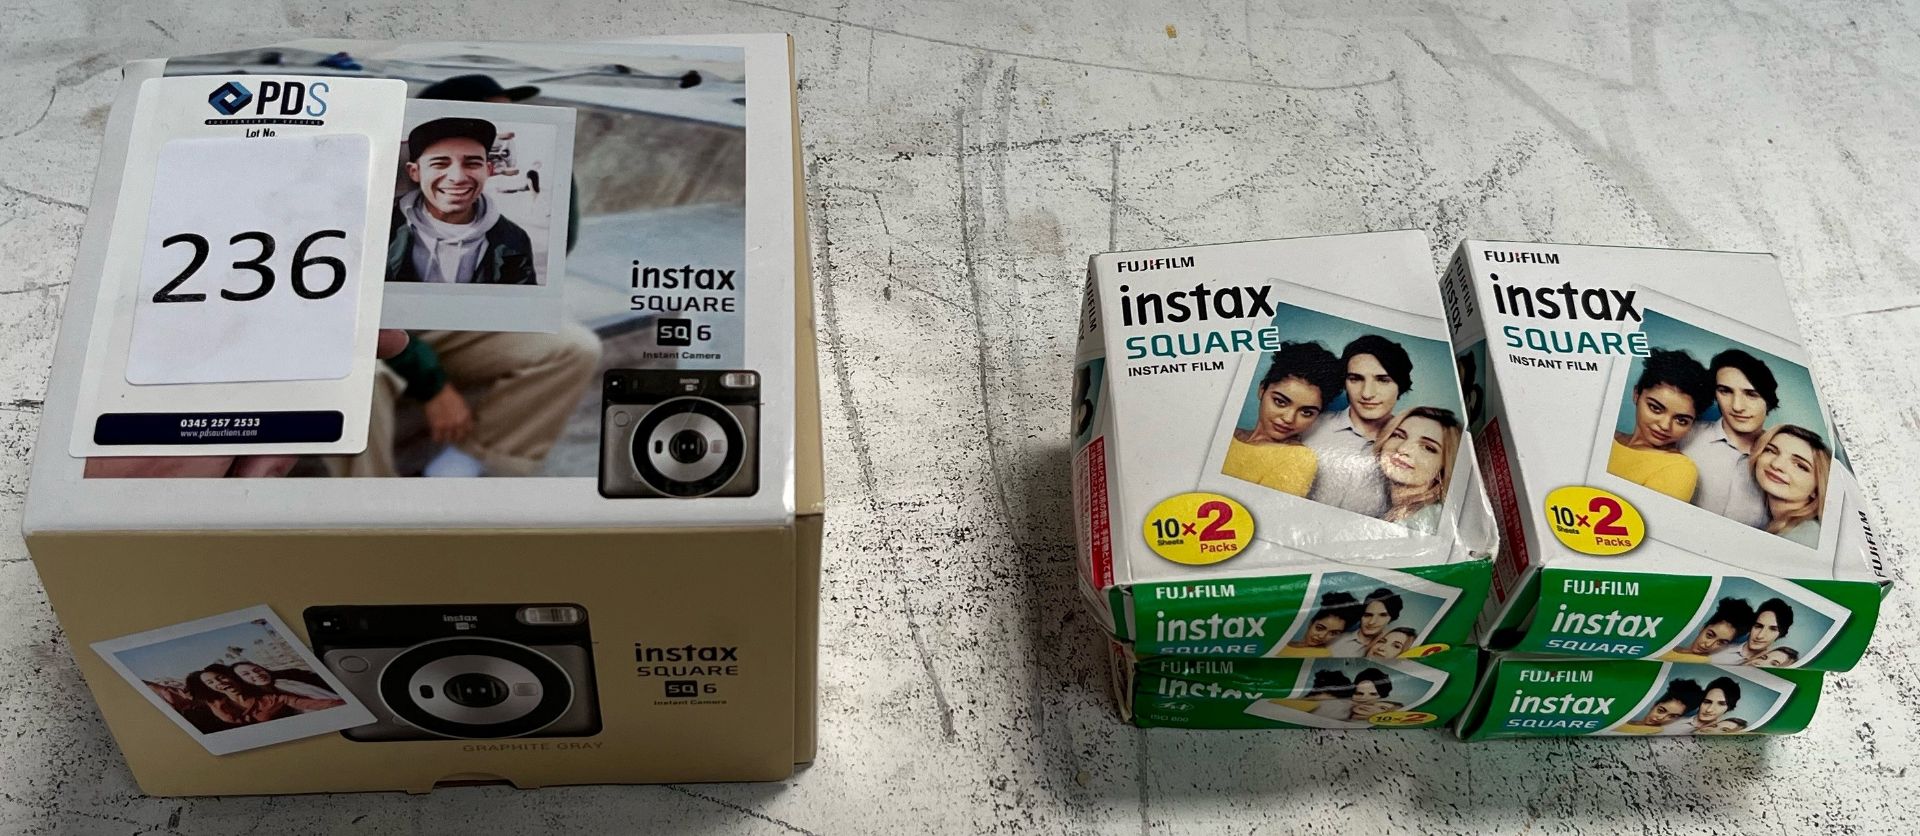 Instax Square 6 Instant Camera with Fujifilm Instax Square Films (Location Brentwood. Please Refer